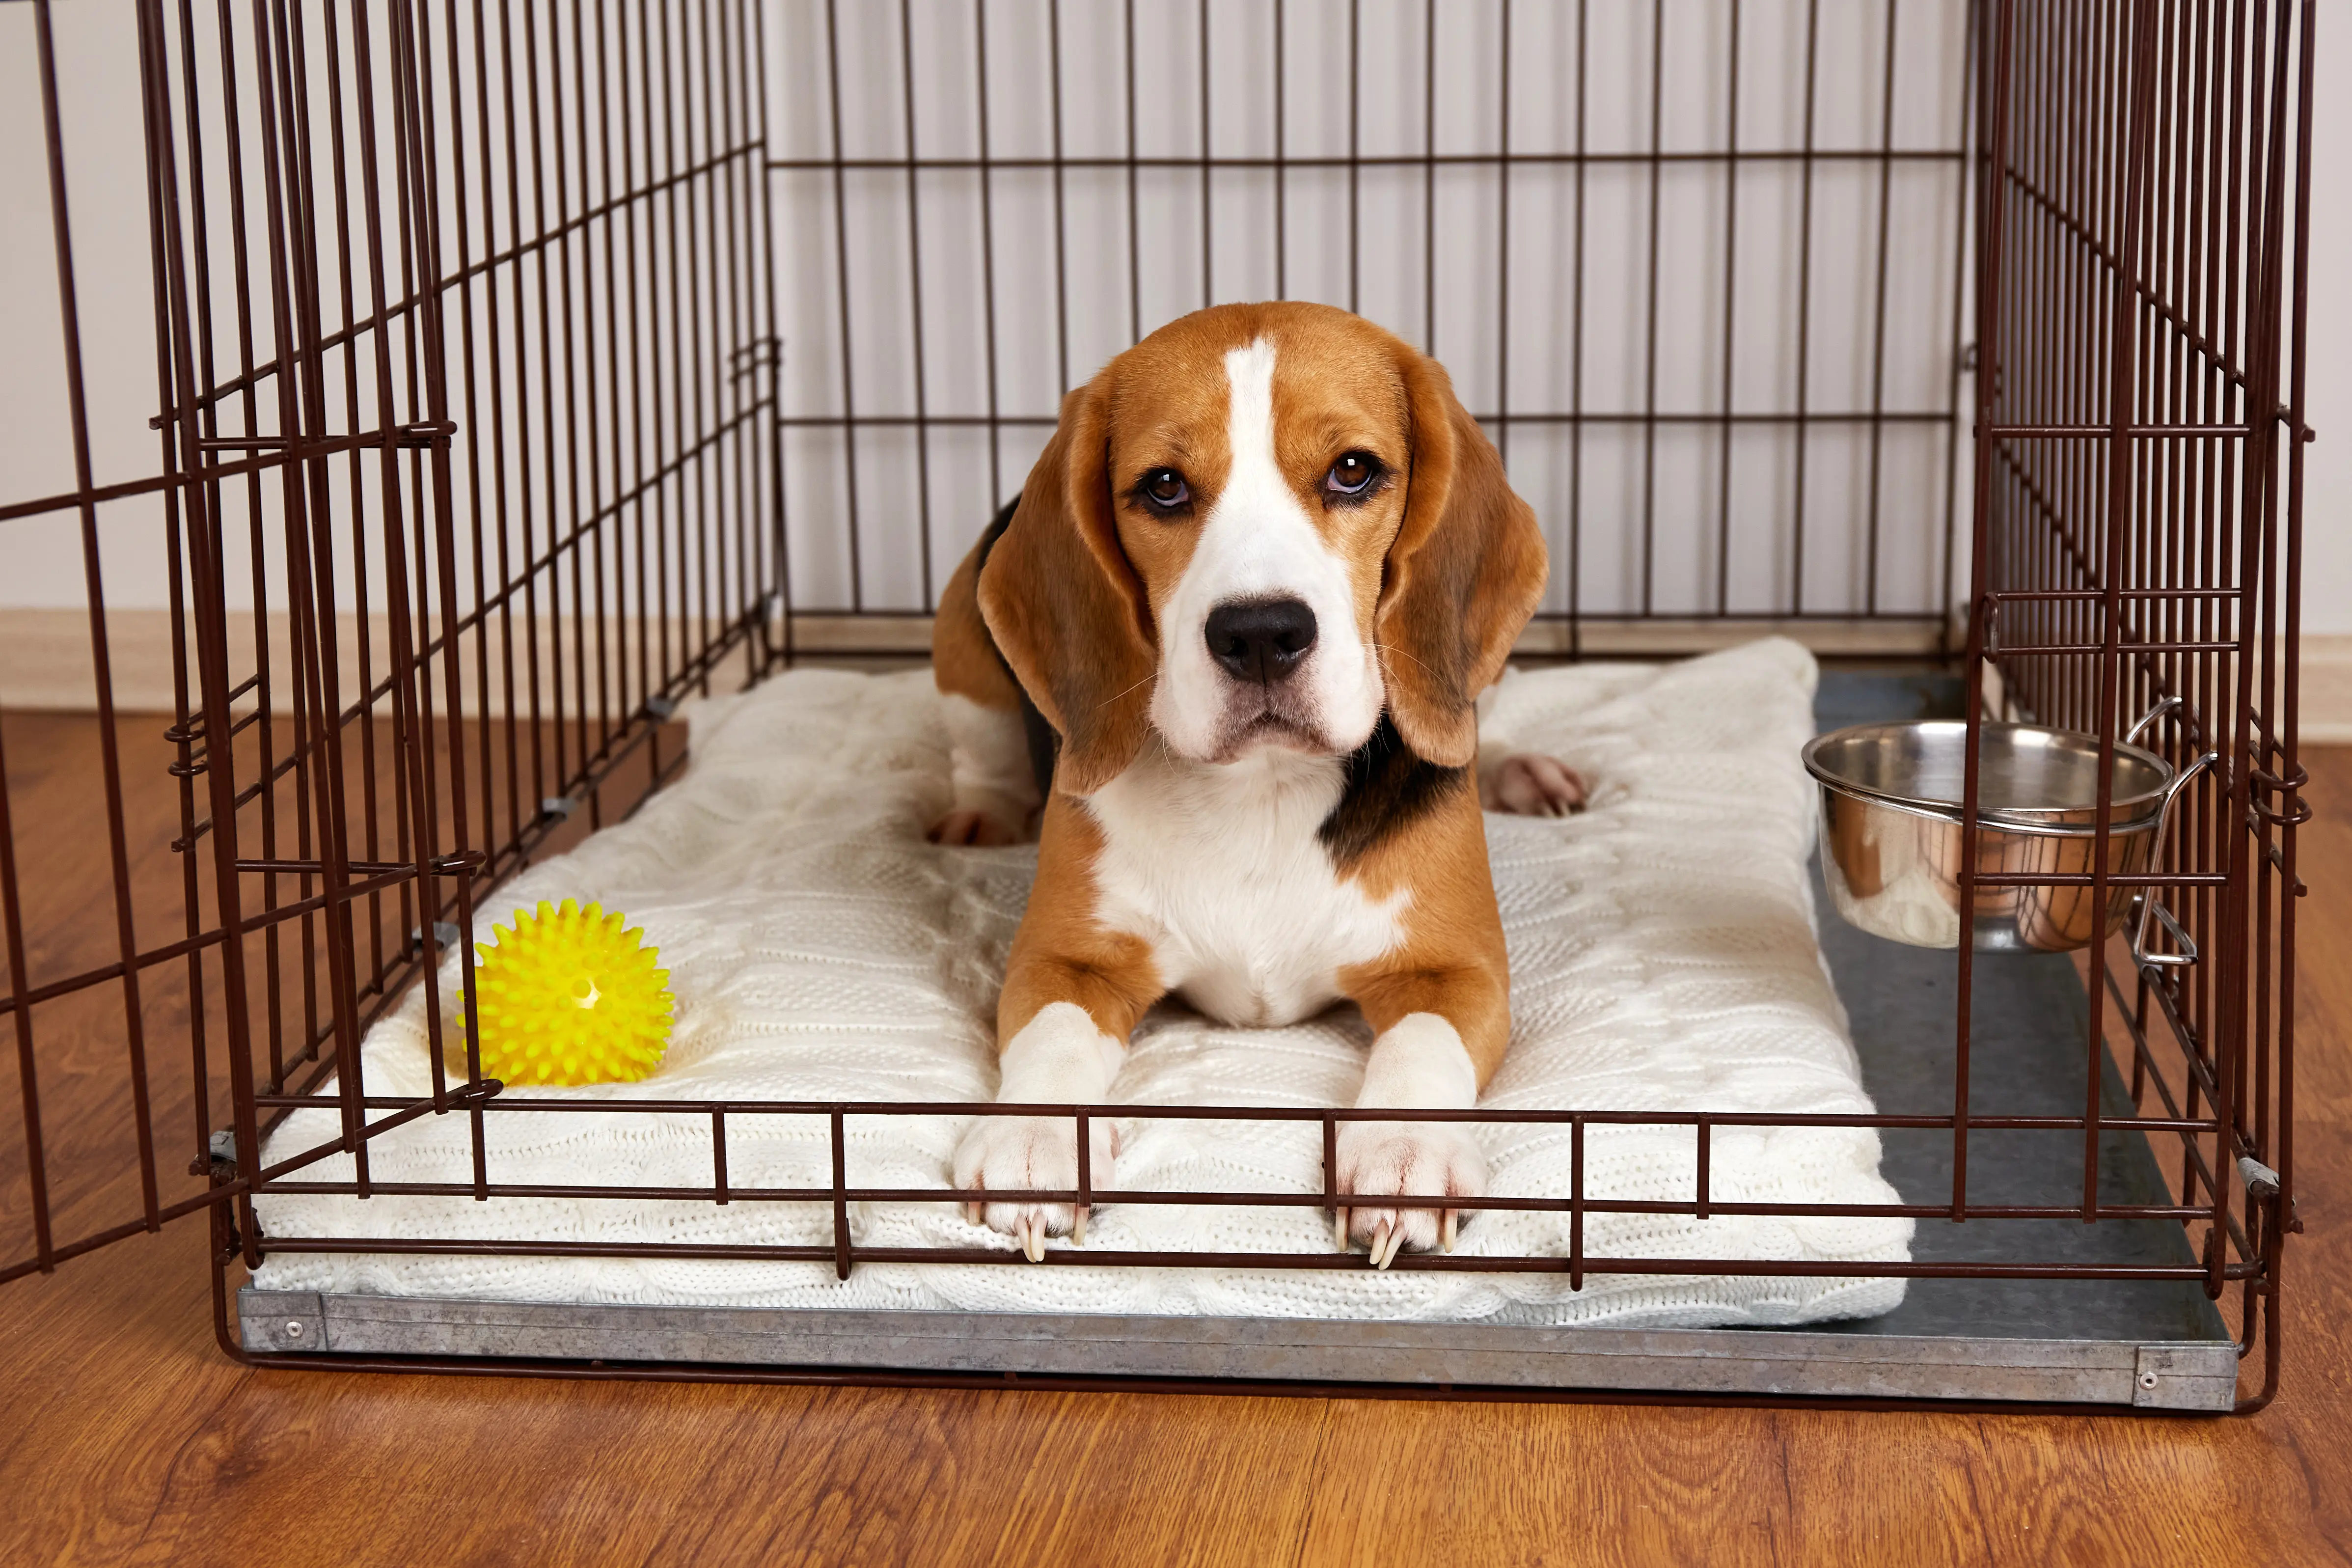 The beagle dog is lying in a cage. Wire crate